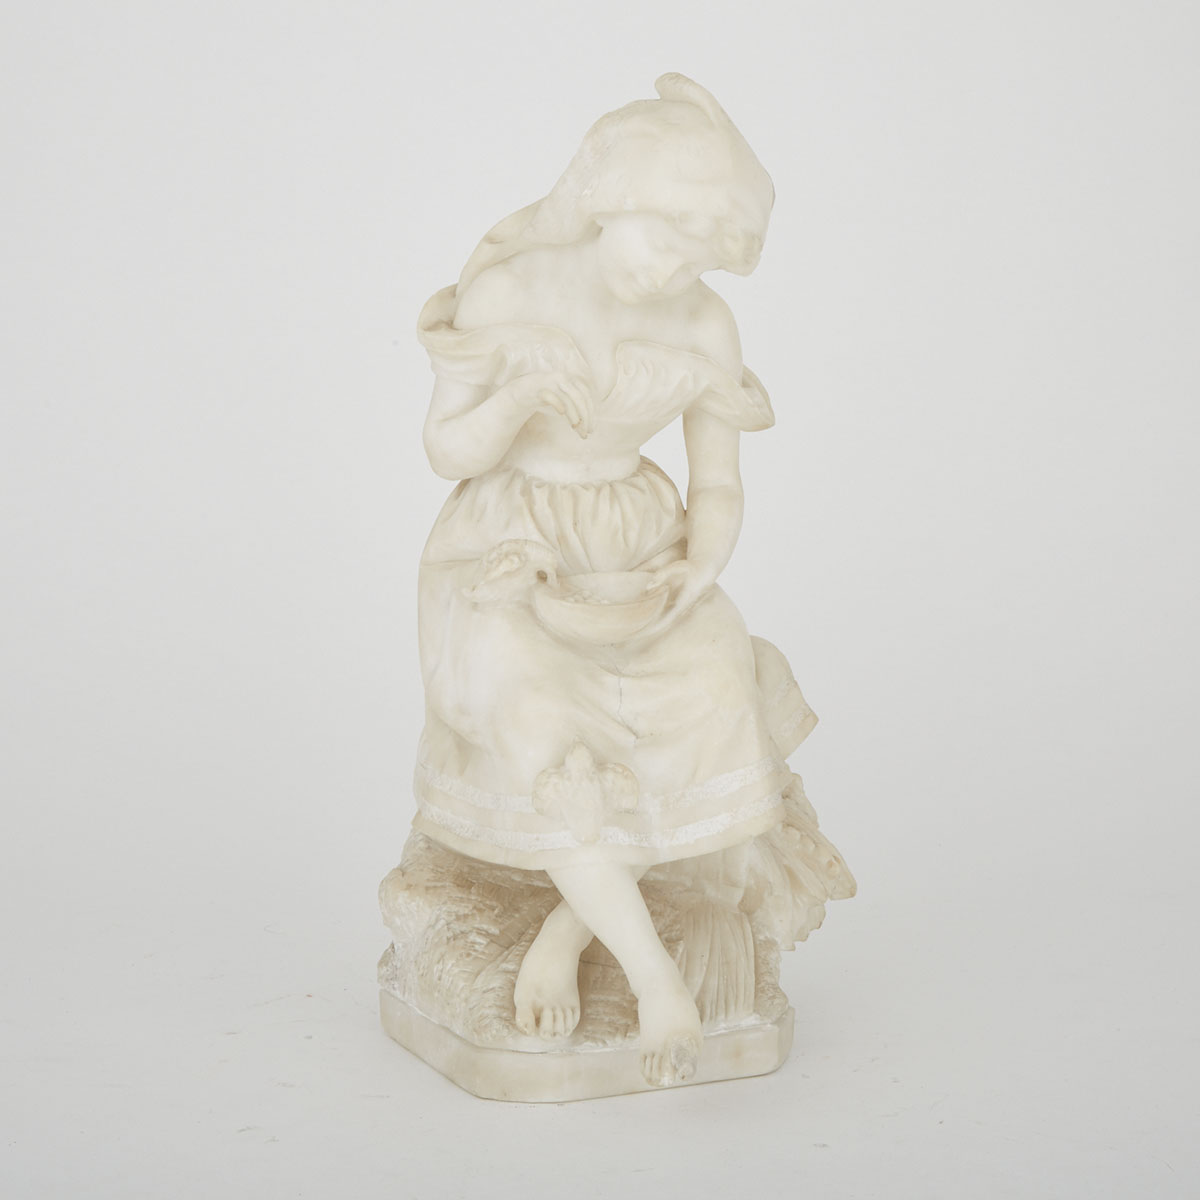 Italian Carved Alabaster Figure of a Young Peasant Girl Feeding Birds, c.1880